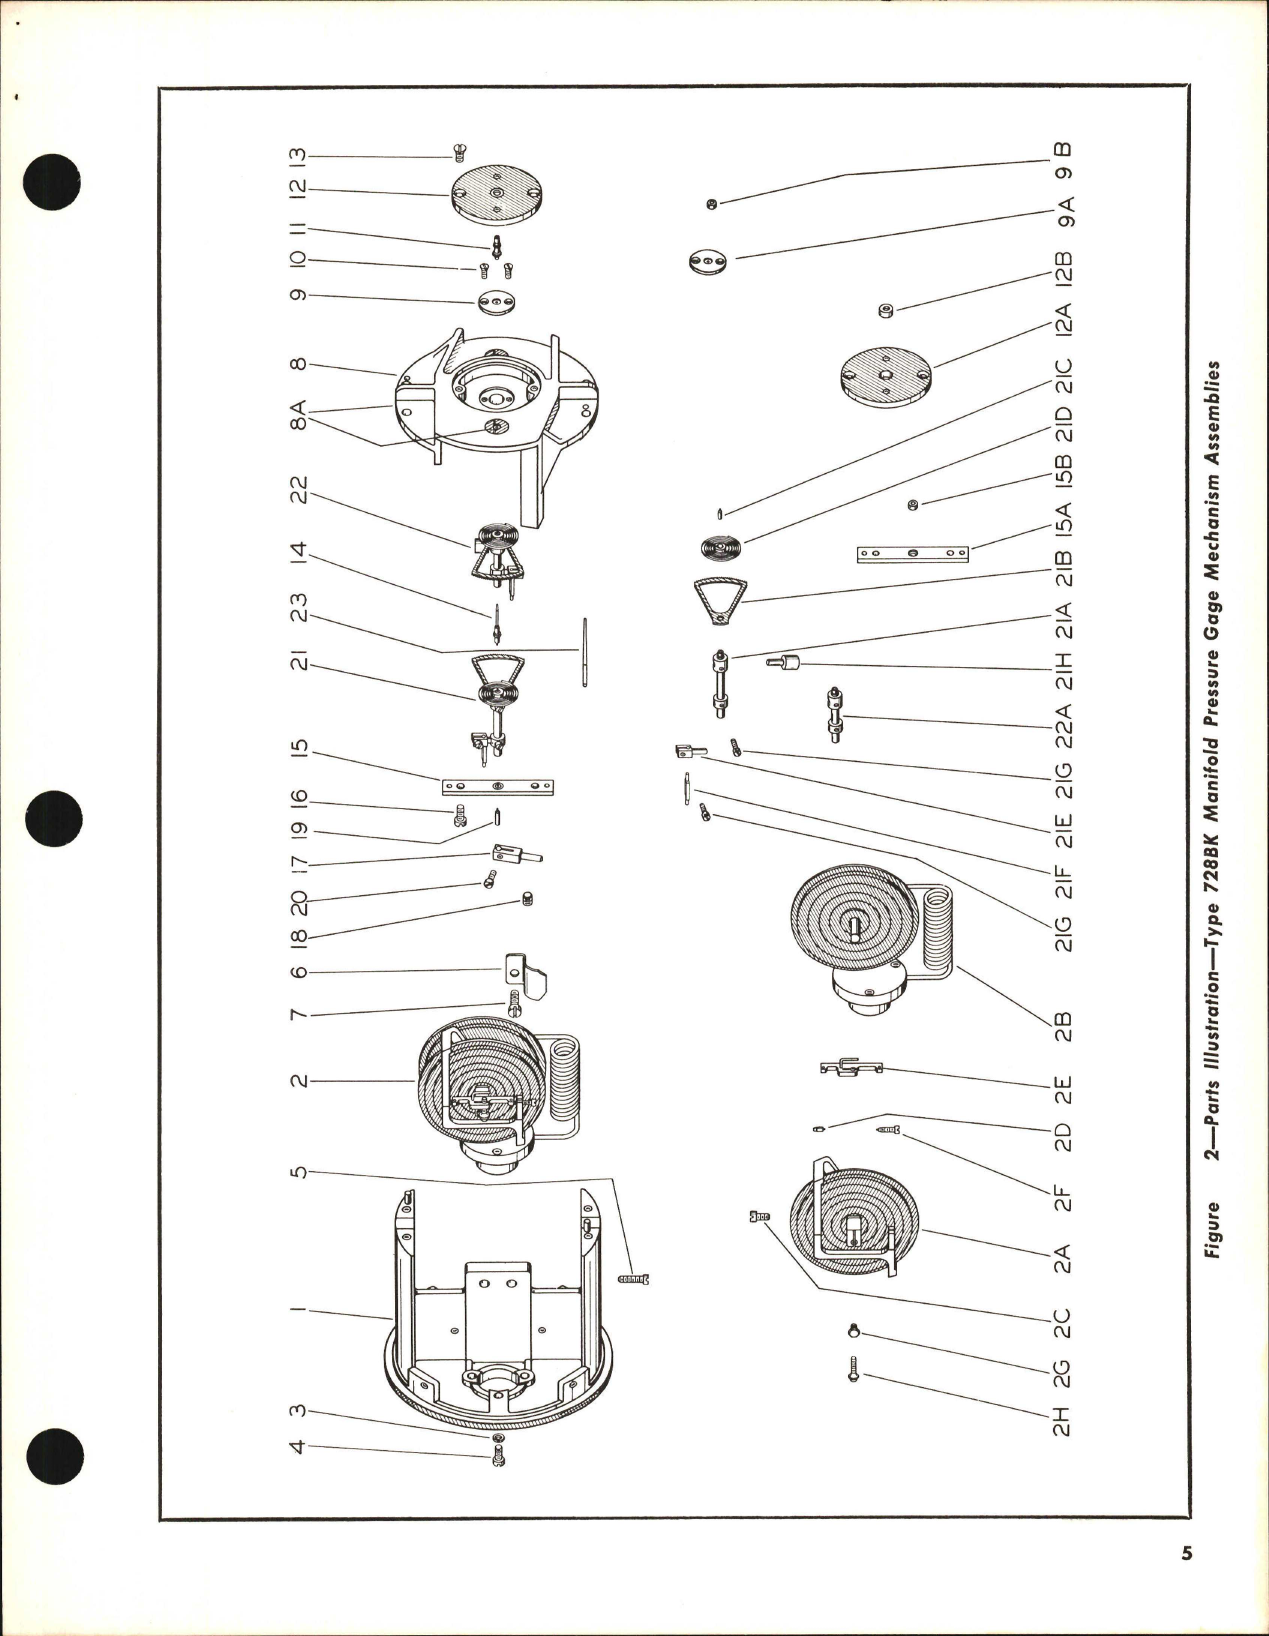 Sample page 5 from AirCorps Library document: Parts Catalog for Kollsman Dual Manifold Pressure Gage 728BK